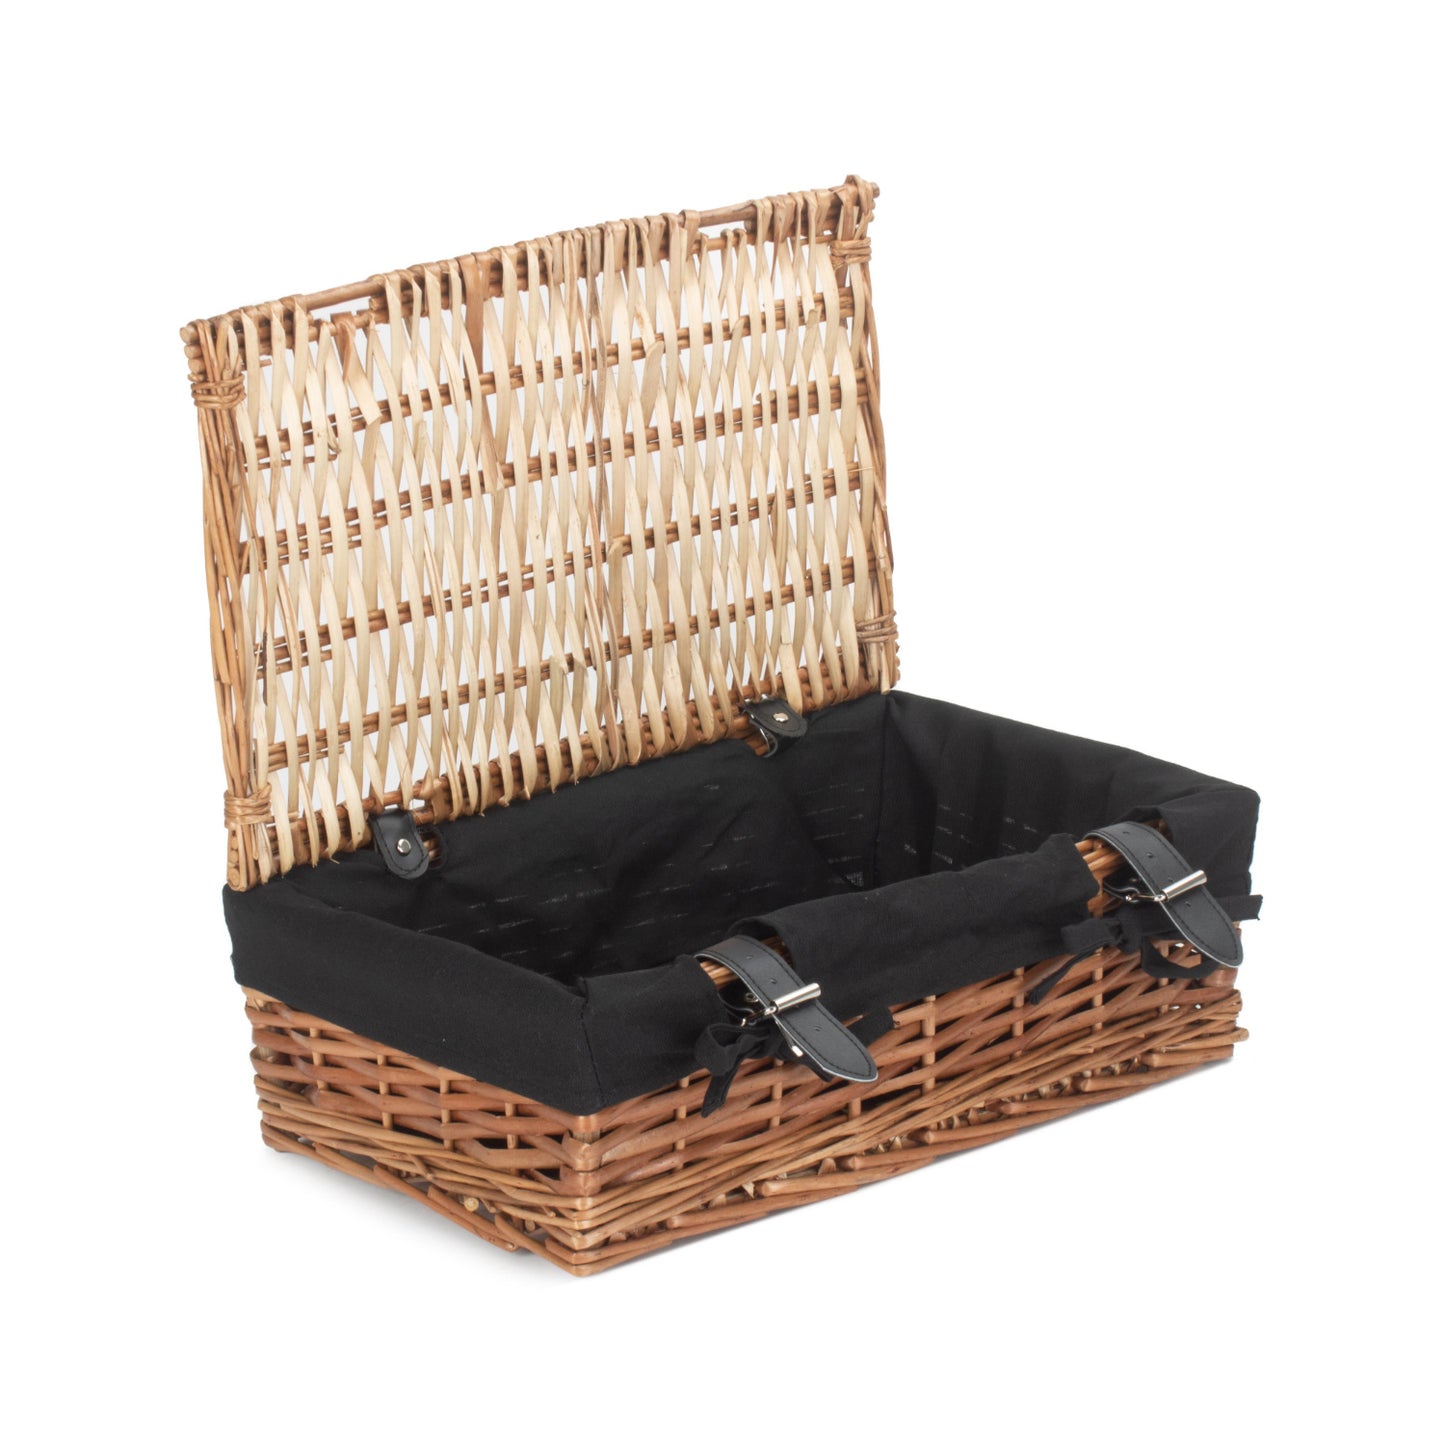 15 Inch Packaging Hamper With Black Lining